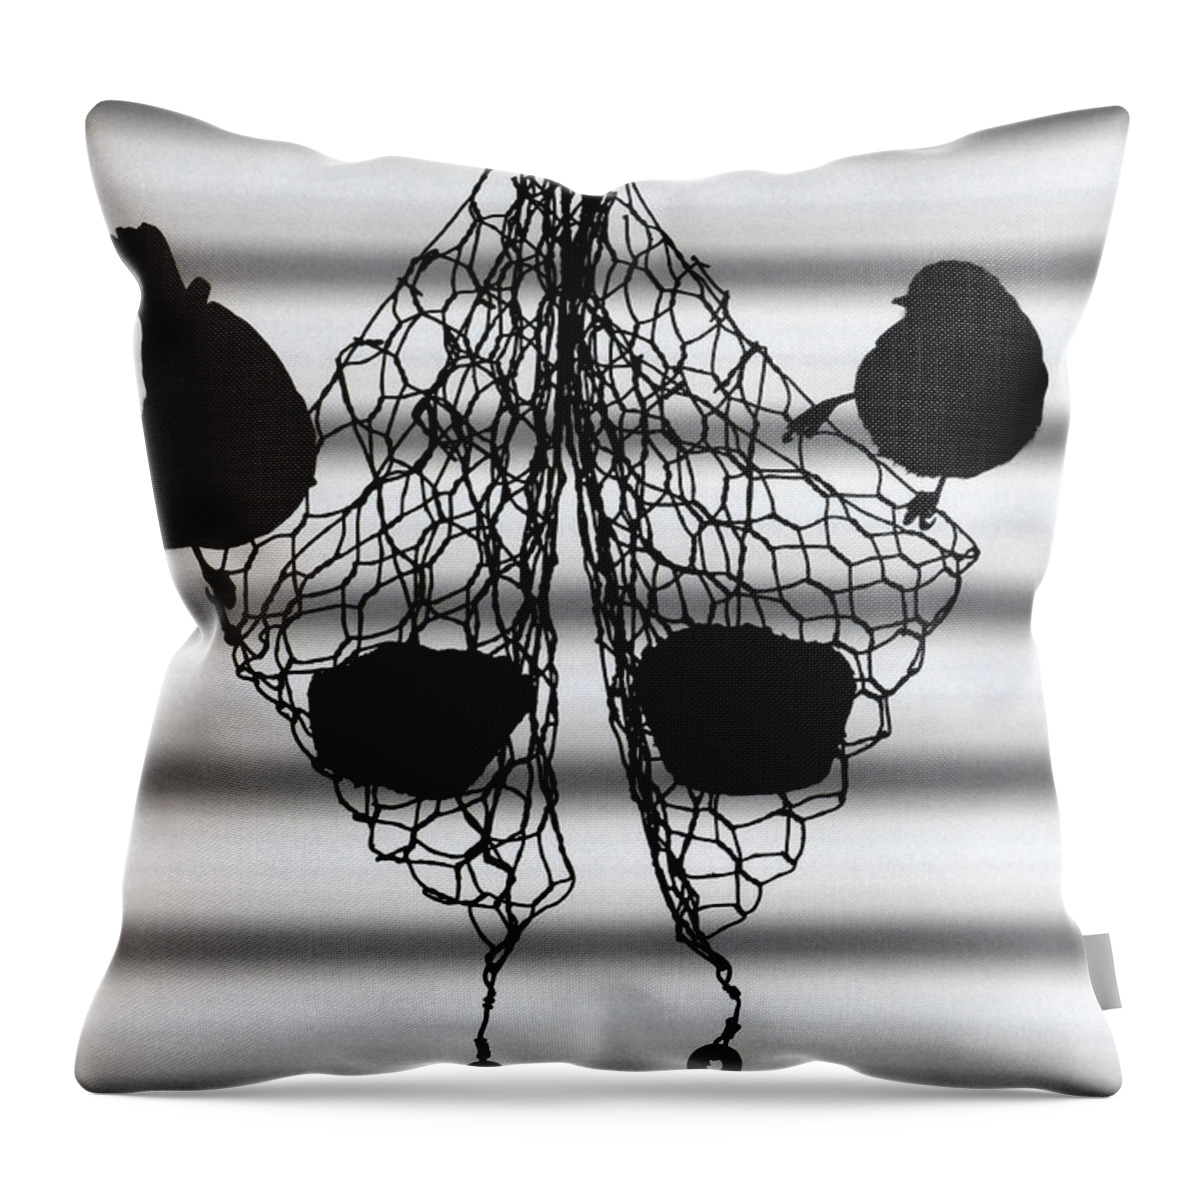 Bird Throw Pillow featuring the photograph Prison Food by Steve Taylor